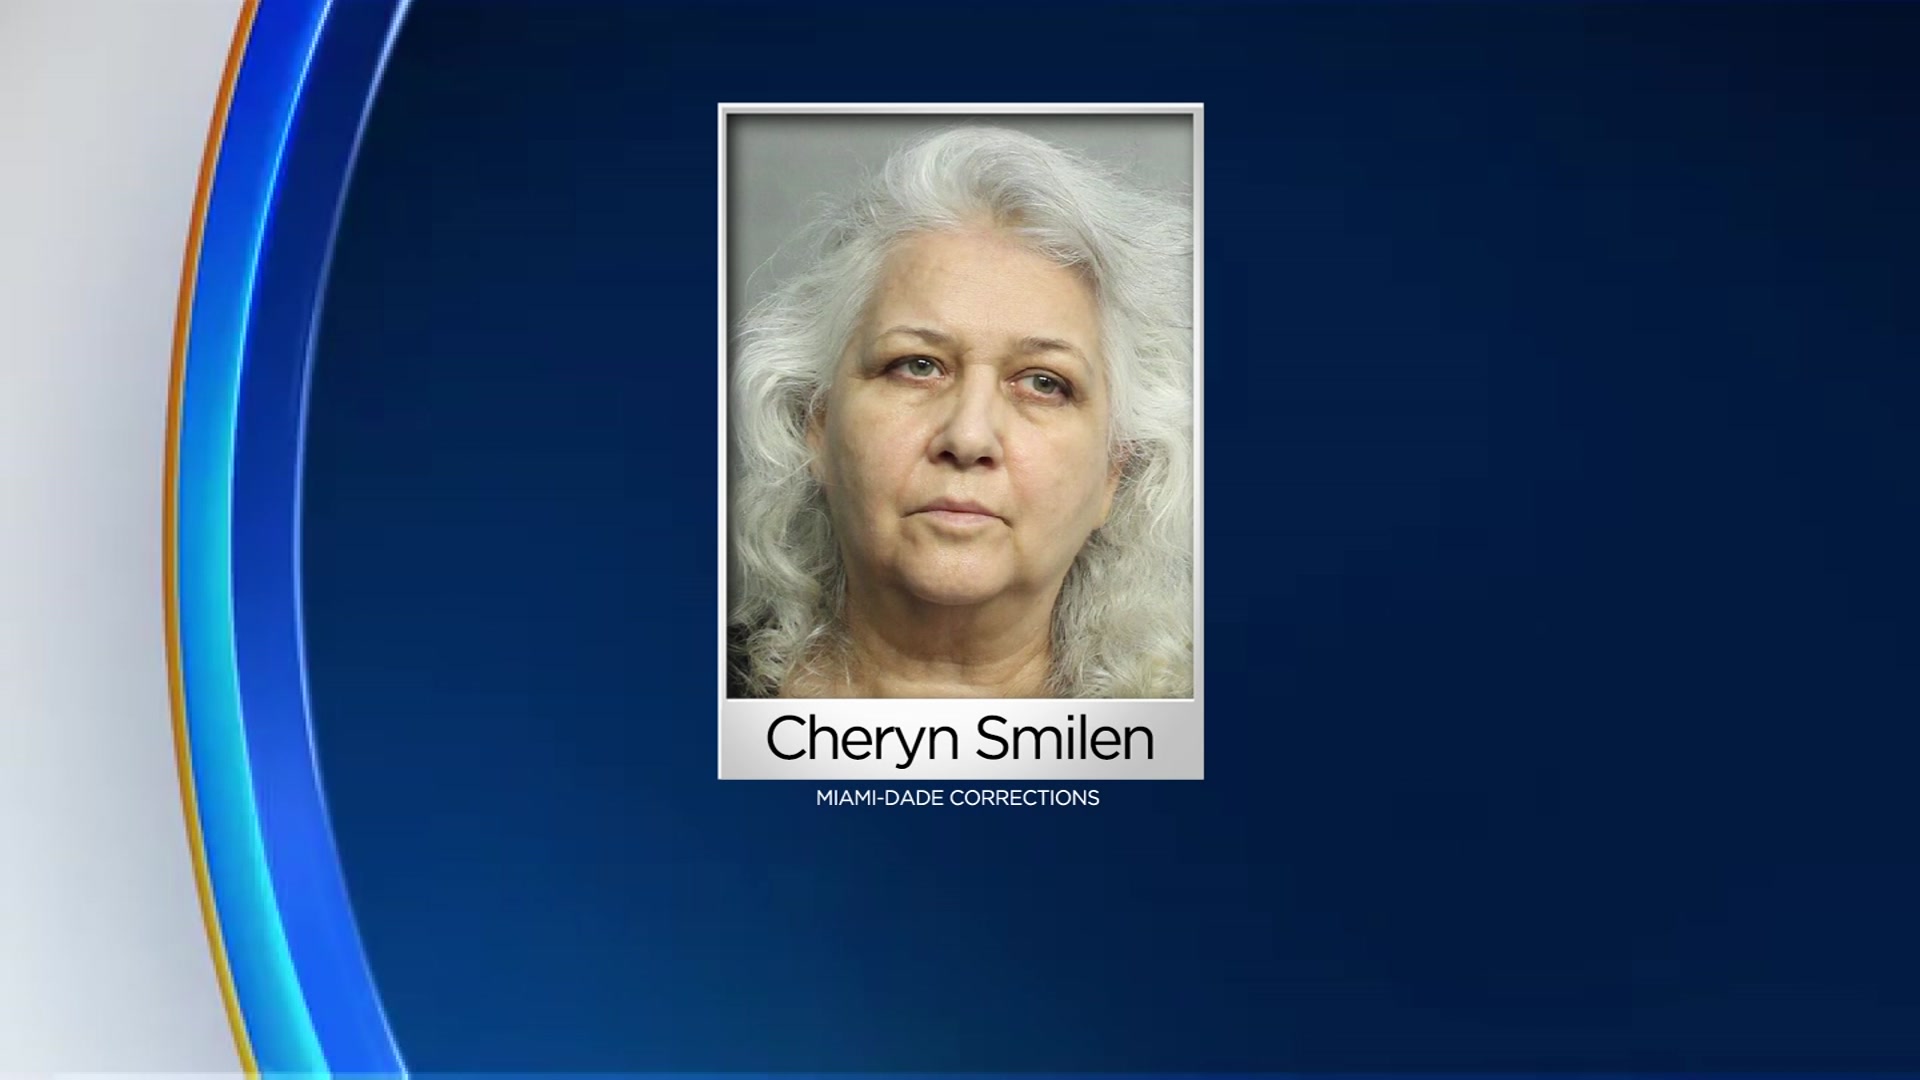 Cheryn Smilen Sentenced To Nearly A Year In Jail For Starving Cats In Miami Apartment – CBS Miami